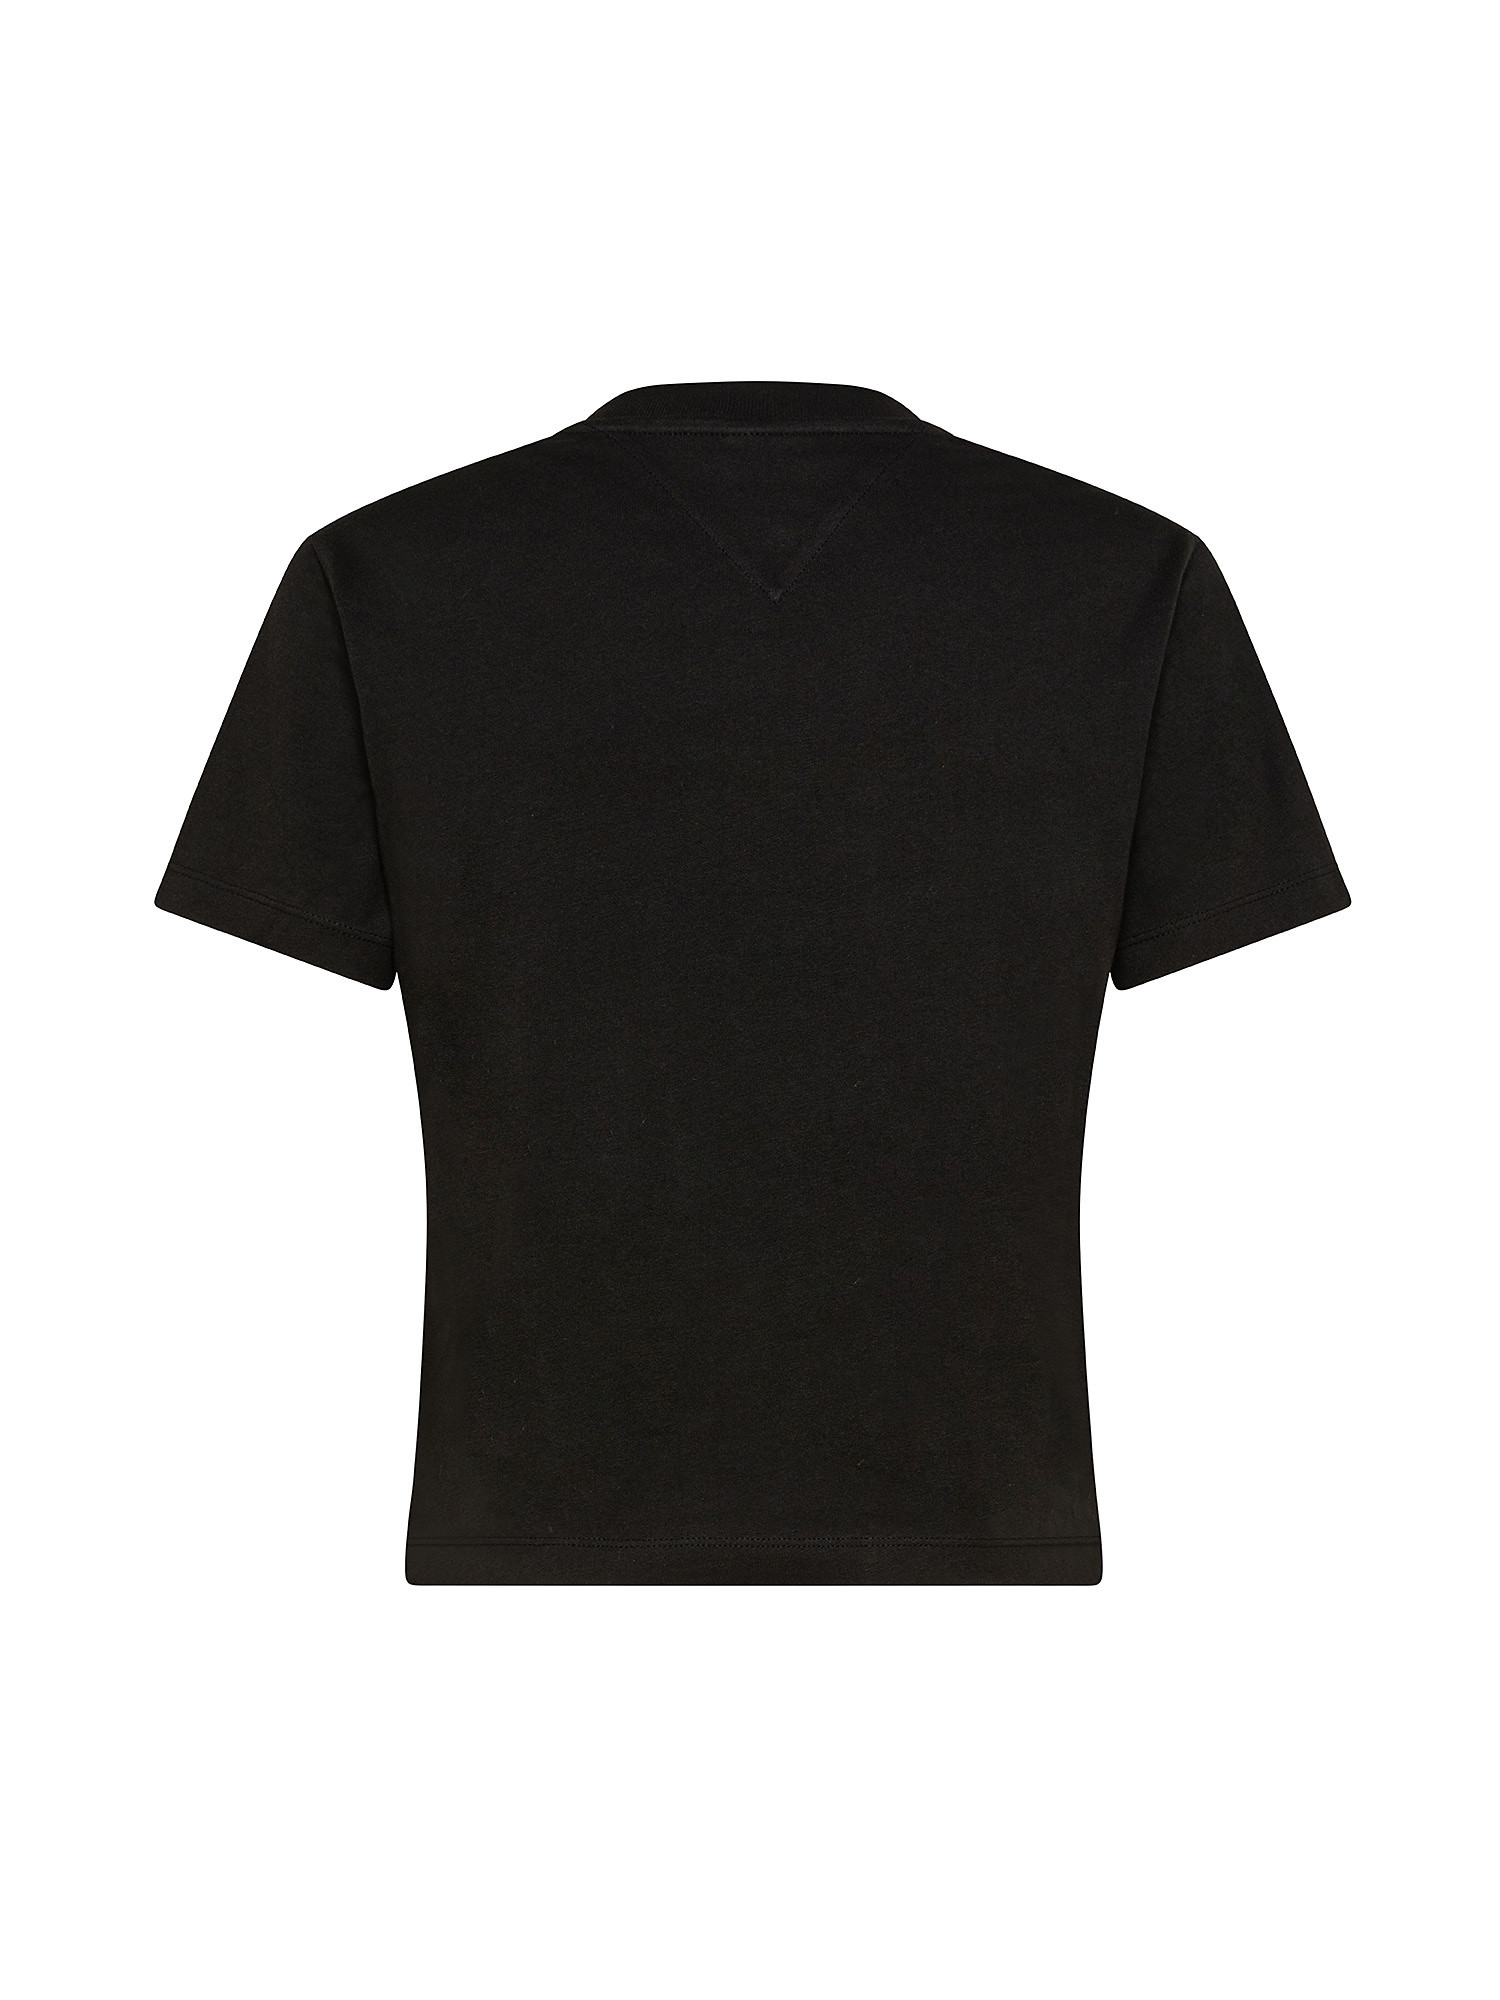 T-shirt with embroidered logo, BLACK, large image number 1